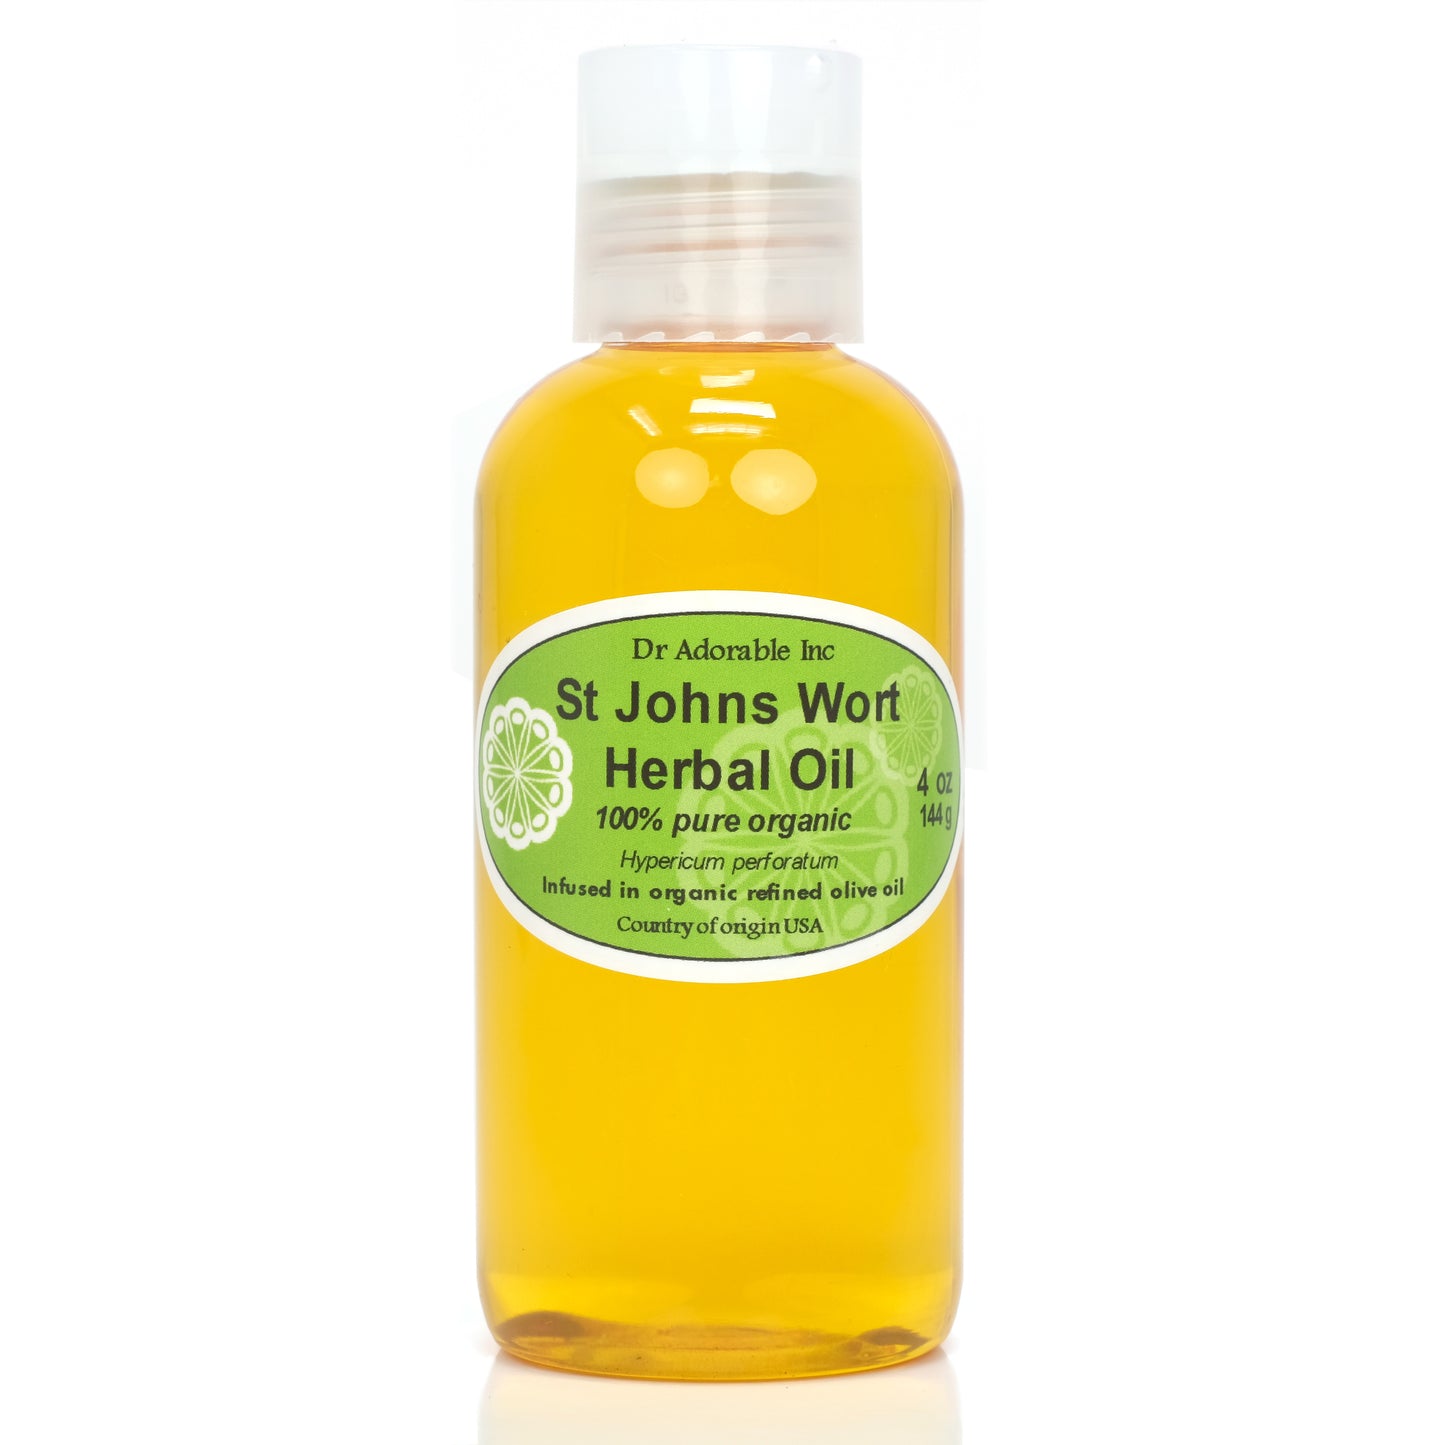 St Johns Wort Herbal Oil - Infused 100% Pure Natural Organic